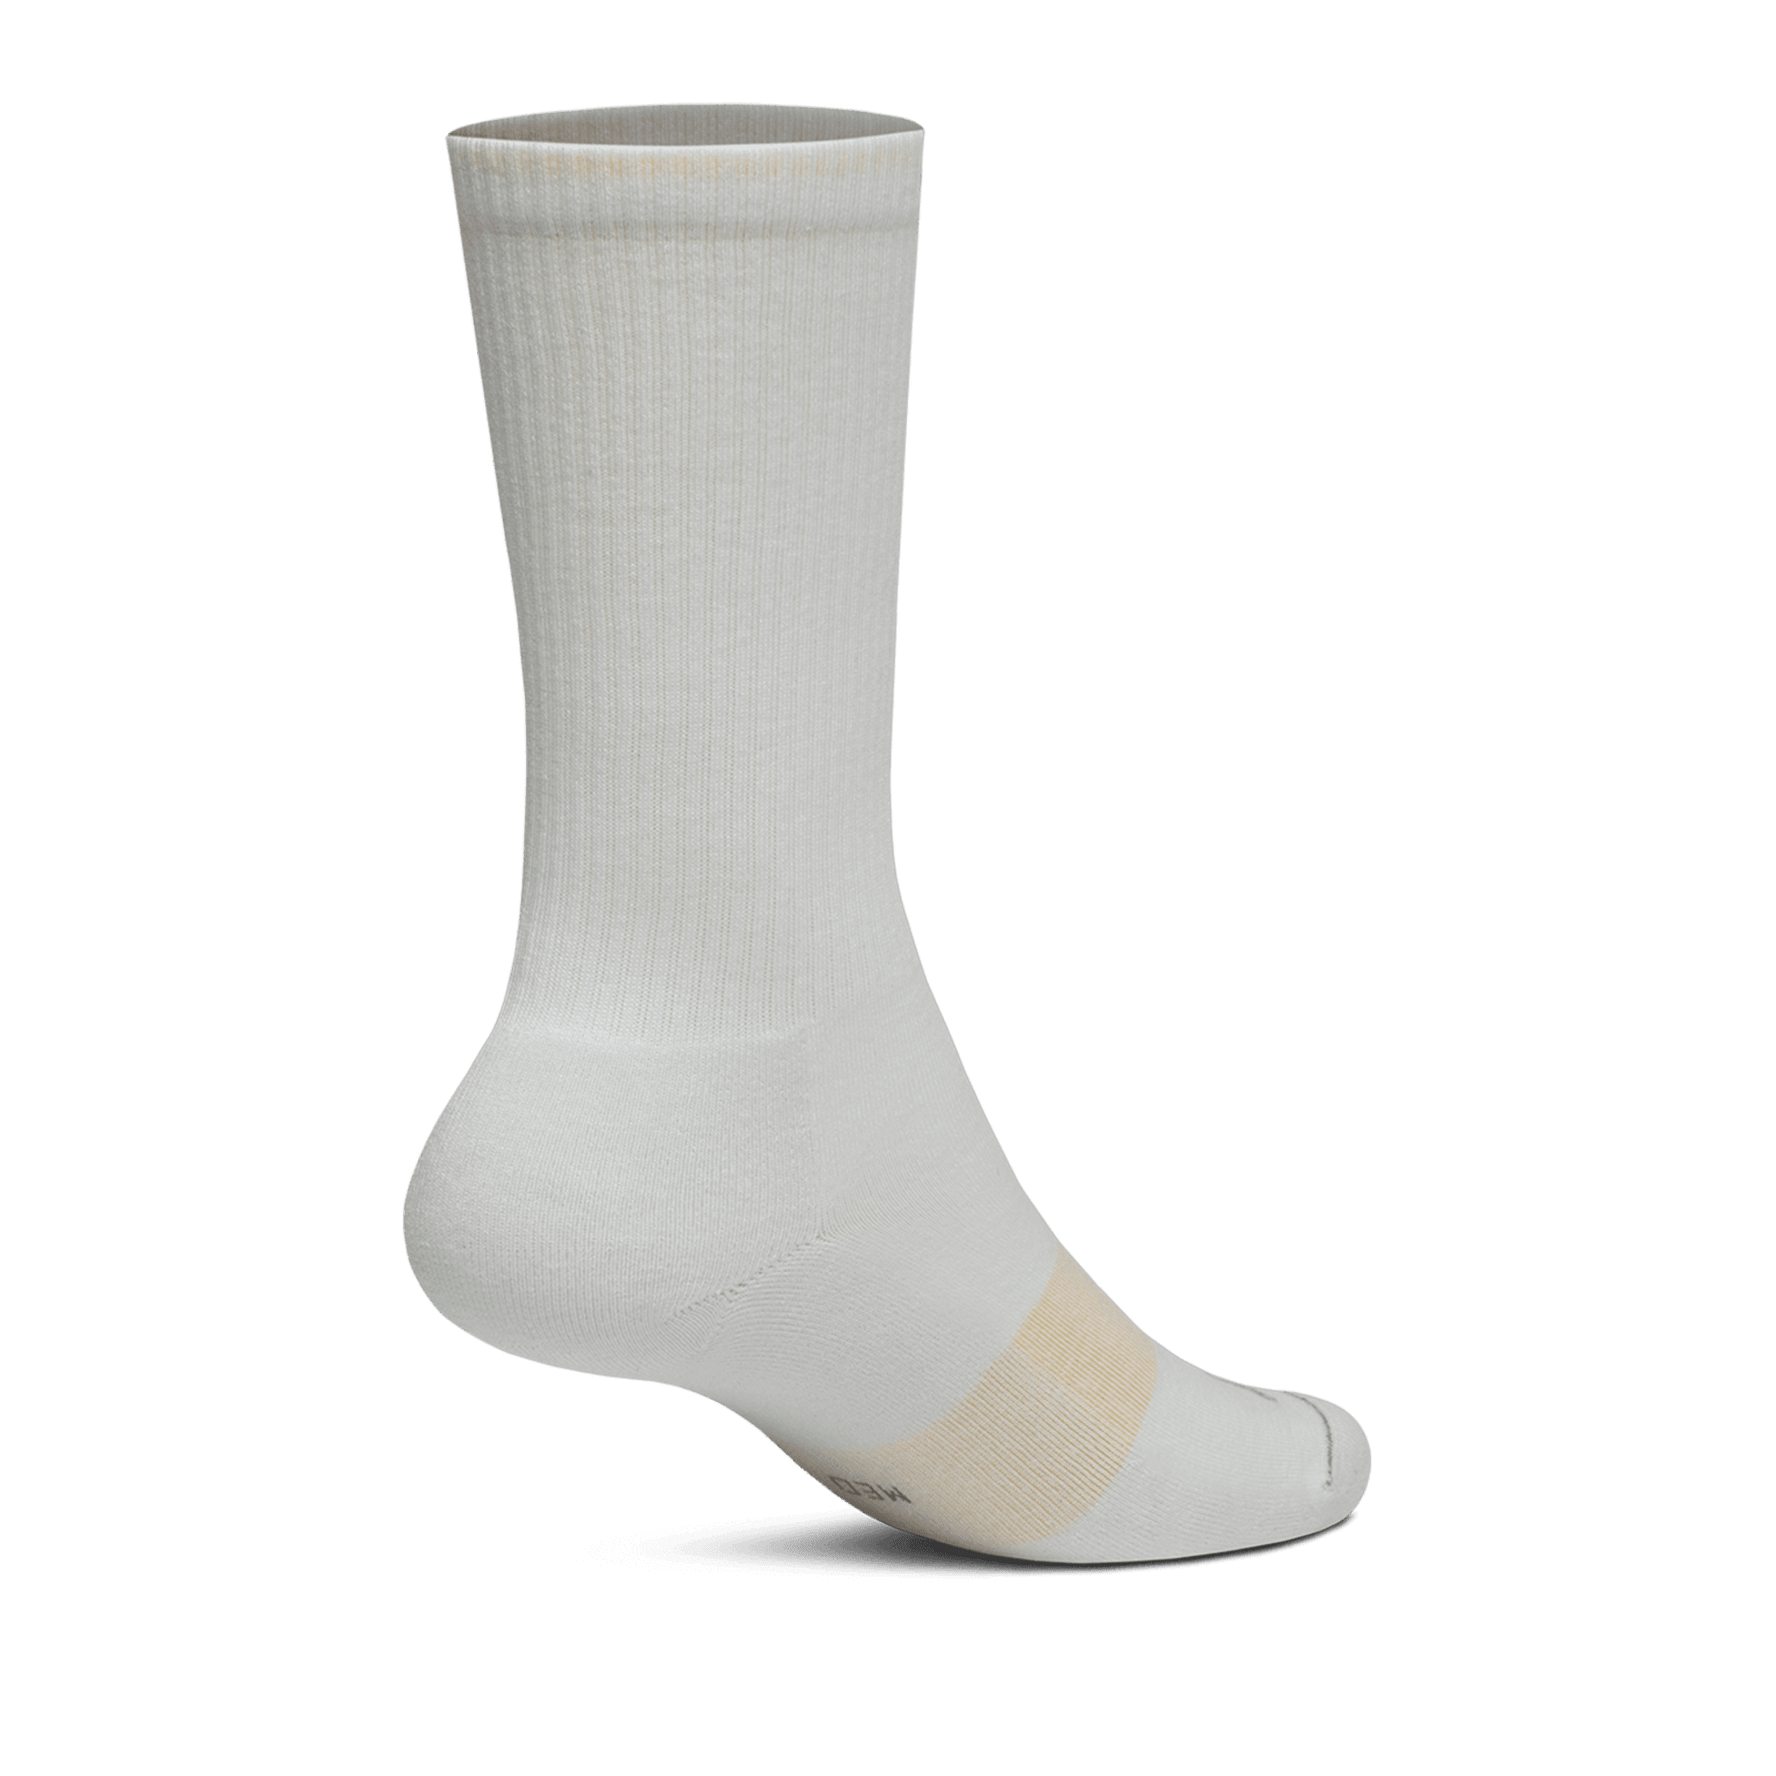 SOCK HYDRO-DRY® BUSINESS SUSTAINABLE